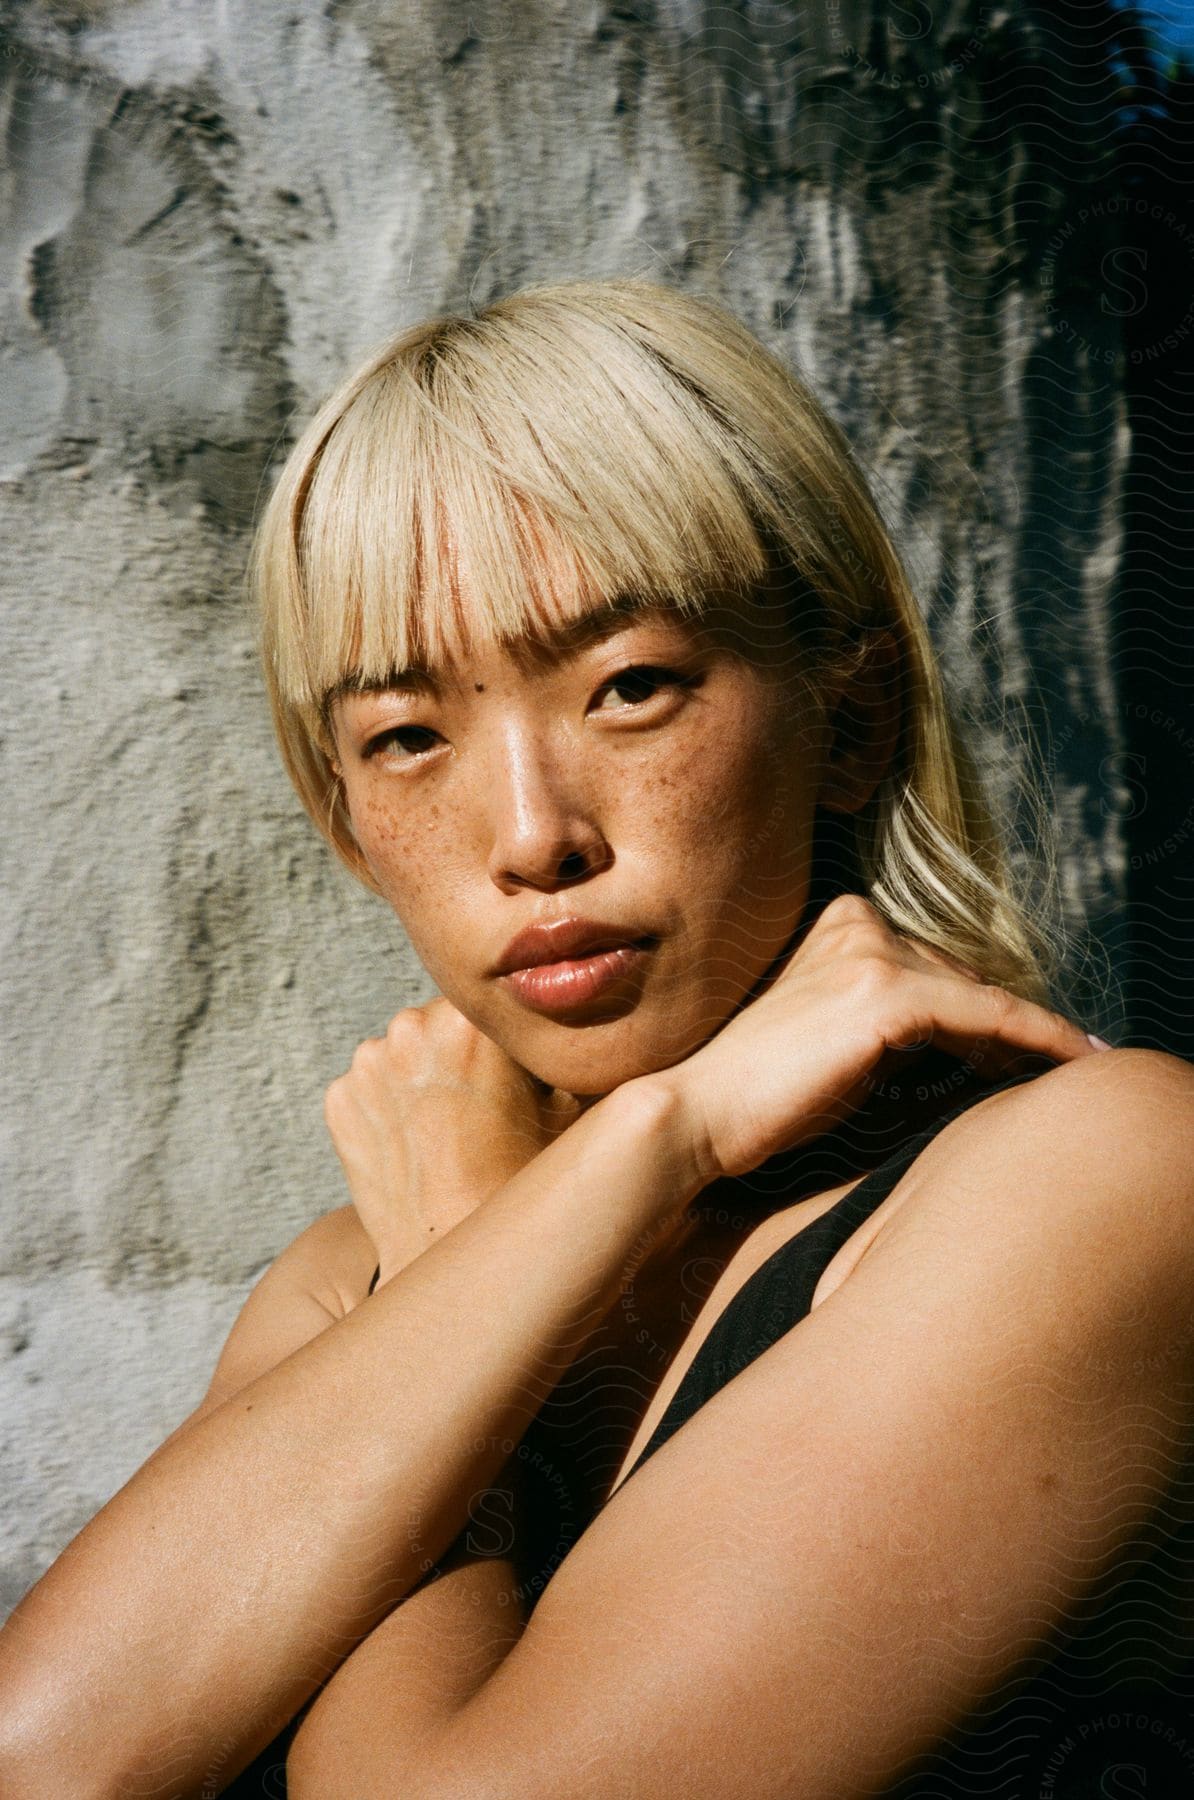 A young Asian woman with freckles on her face.